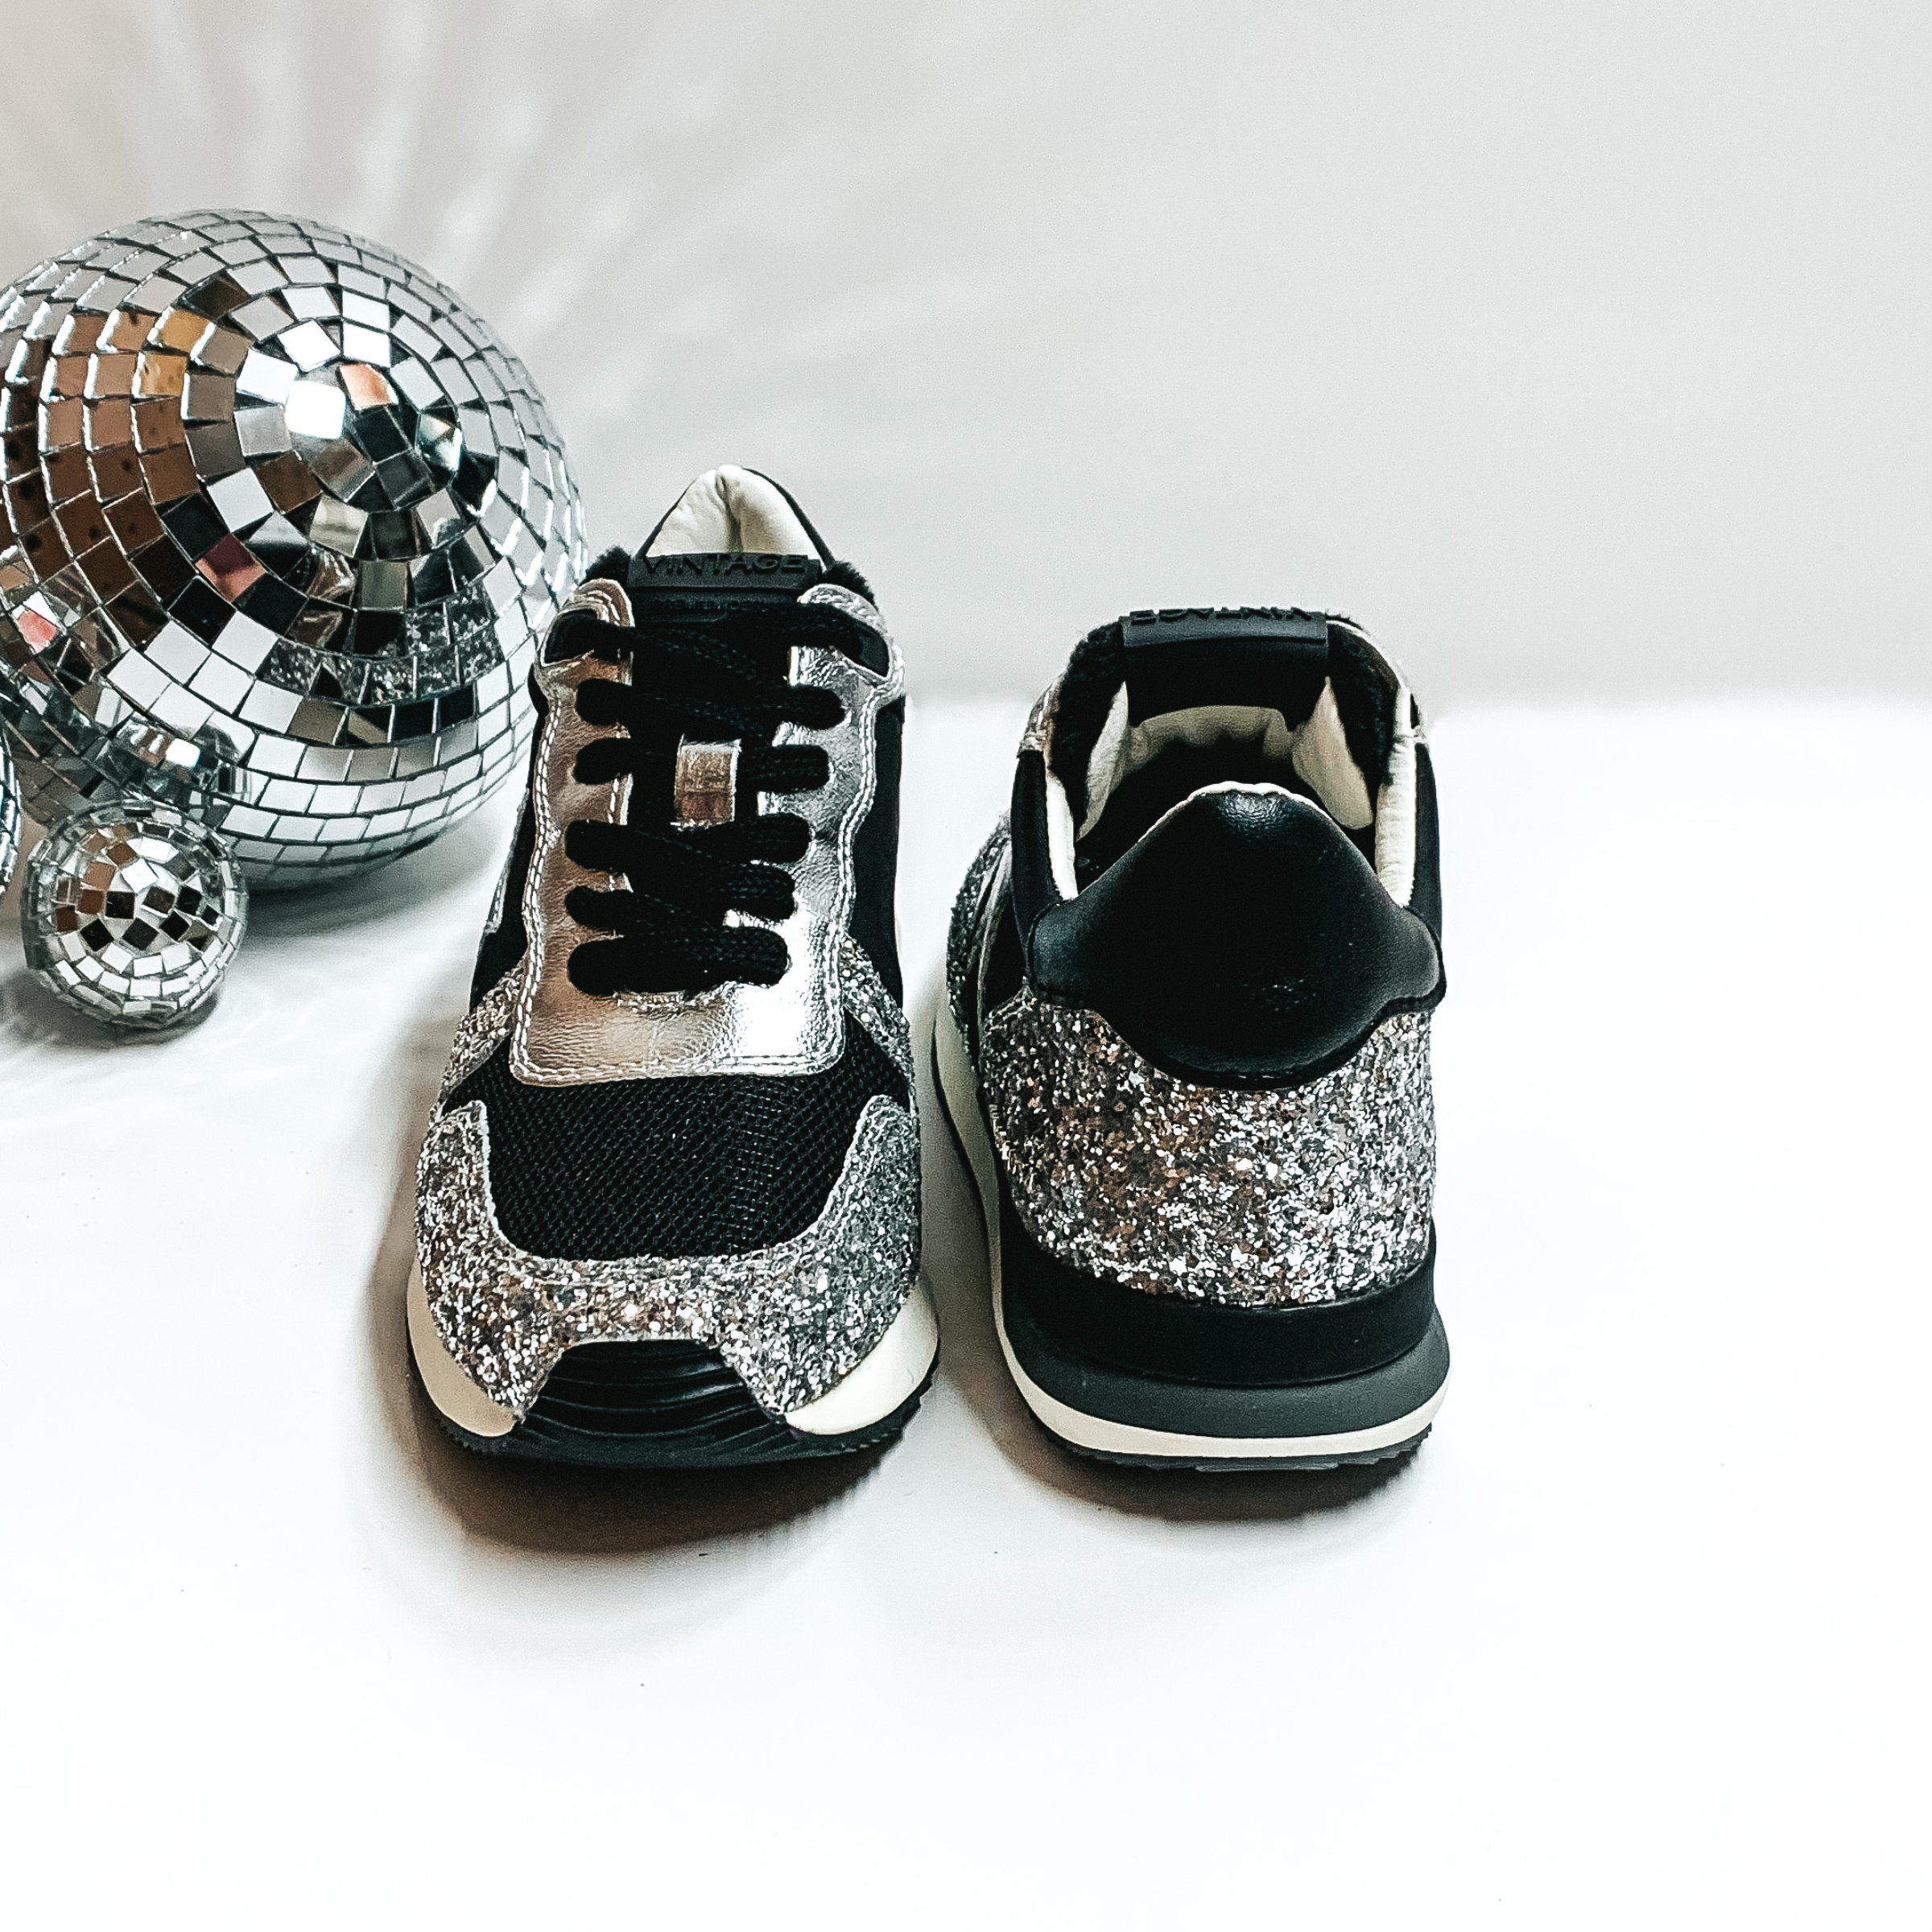 Vintage Havana | Rock Running Shoe in Black and Silver Glitter - Giddy Up Glamour Boutique